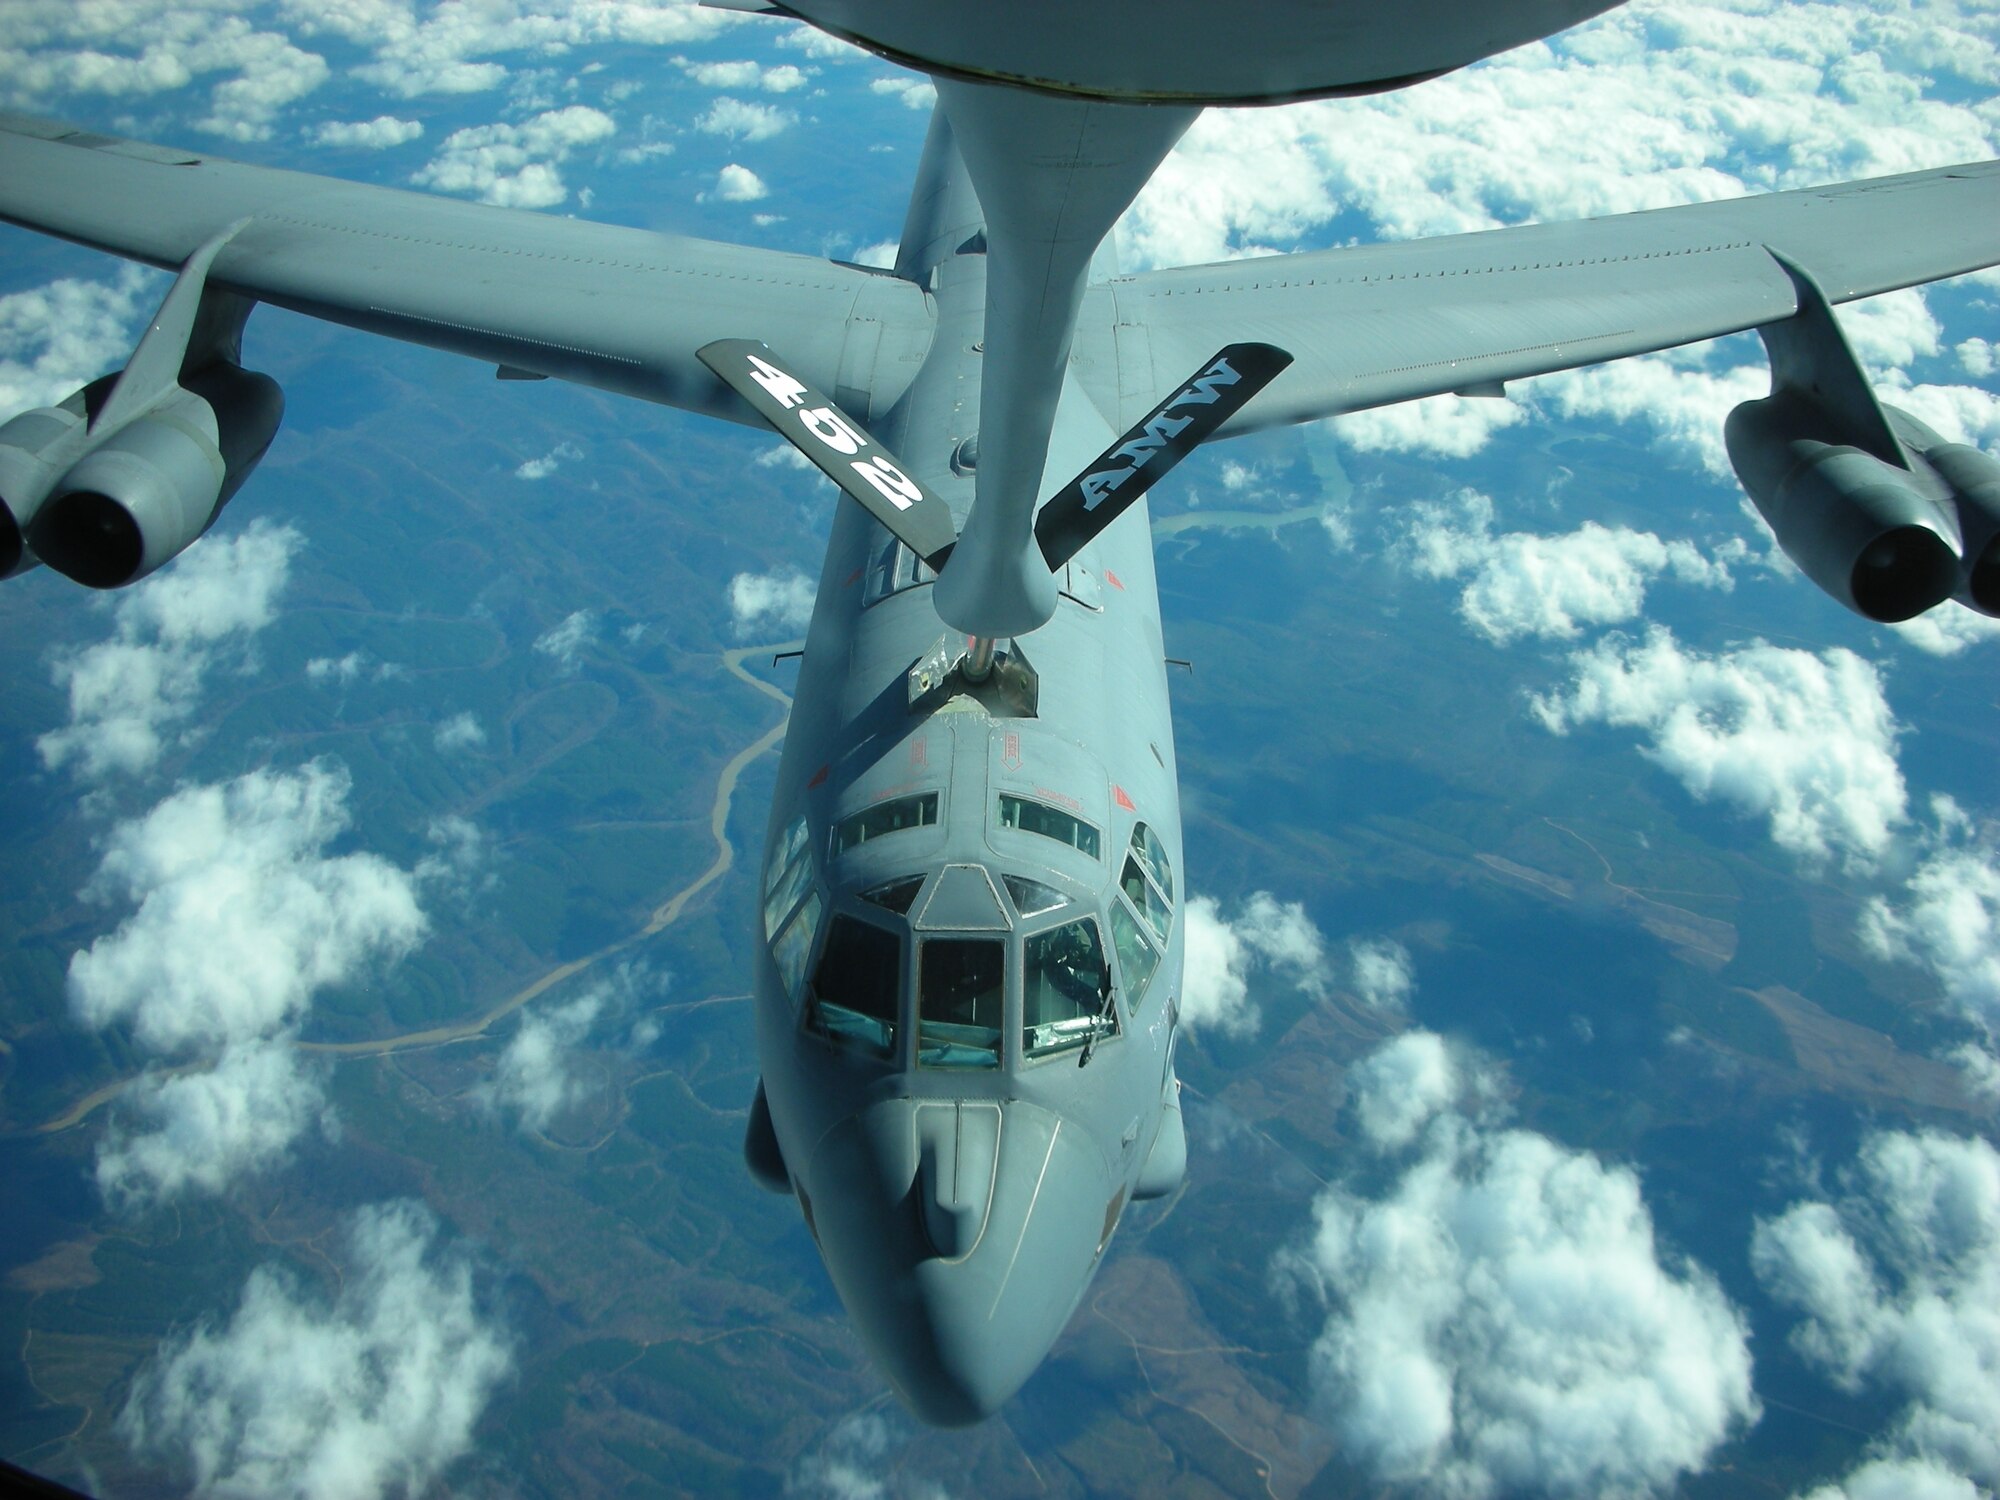 A KC-135 from the 336th Air Refueling Squadron out of March Air Reserve Base, Calif., refuels a B-52 from the 2d Bomb Wing. The refueler was deployed to Barksdale Air Force Base, La., to participate in training. (Senior Master Sgt. Kenneth Horner/U.S. Air Force)